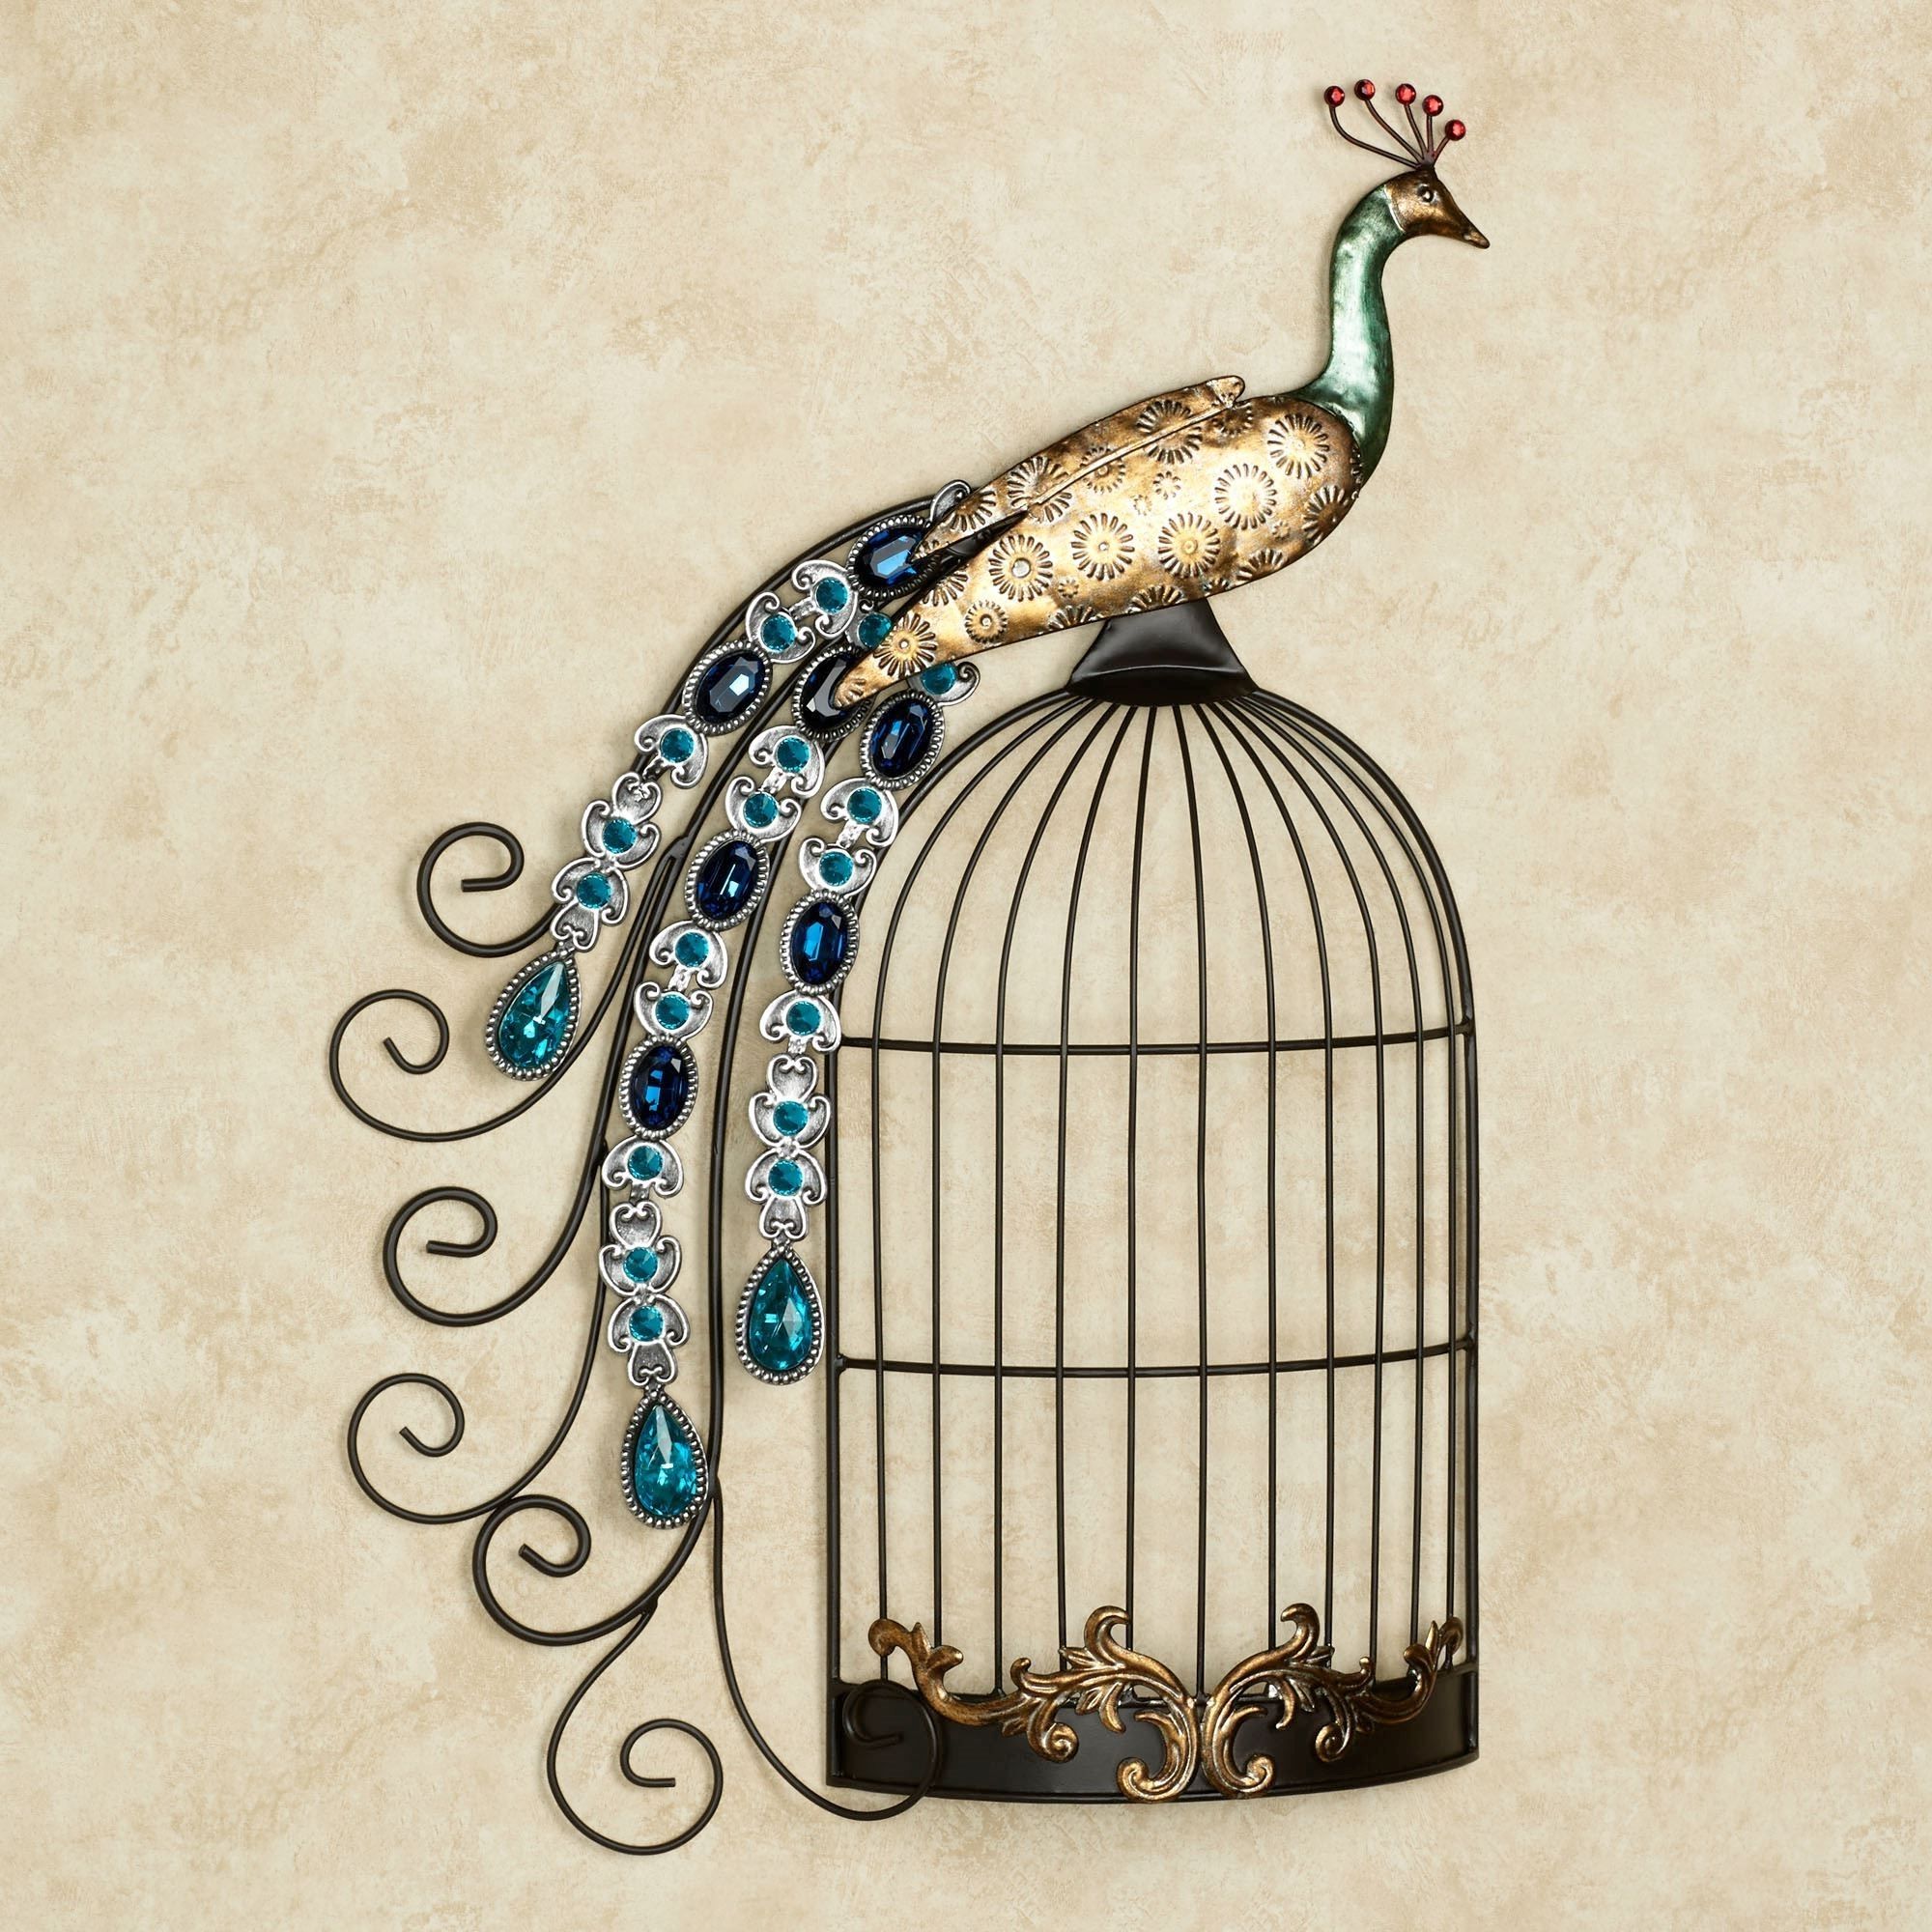 Widely Used Touch Of Class Wall Art Regarding Peacock Jewels On Cage Metal Wall Art (View 2 of 15)